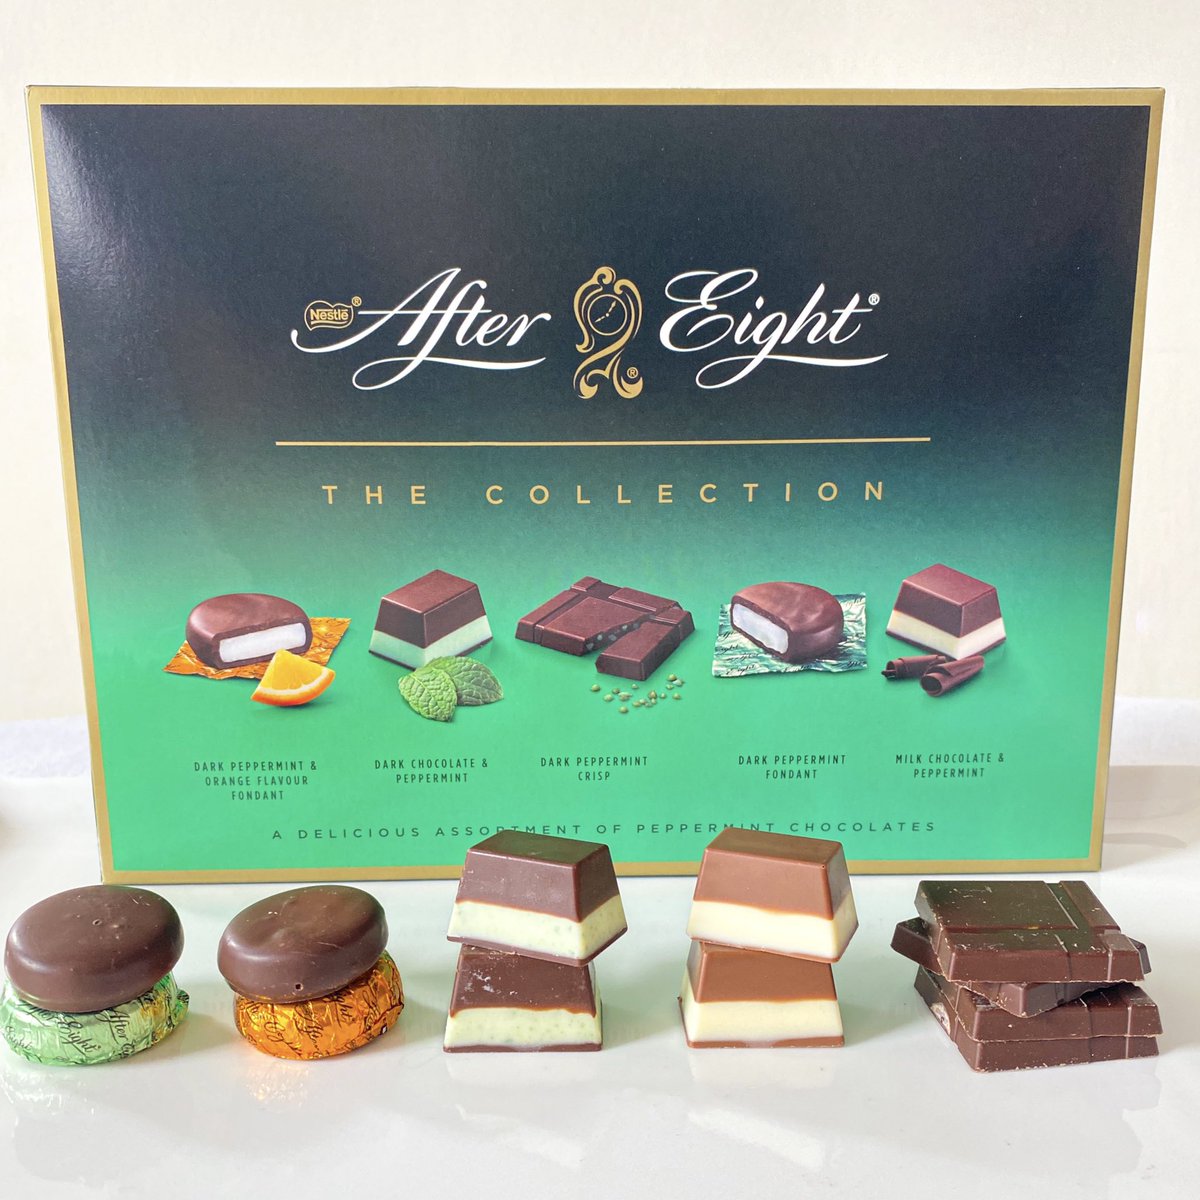 New After Eight The Collection Review: instagram.com/p/CfUCtAxLukv/ #aftereight #mint #chocolates #tesco #mintchocolate